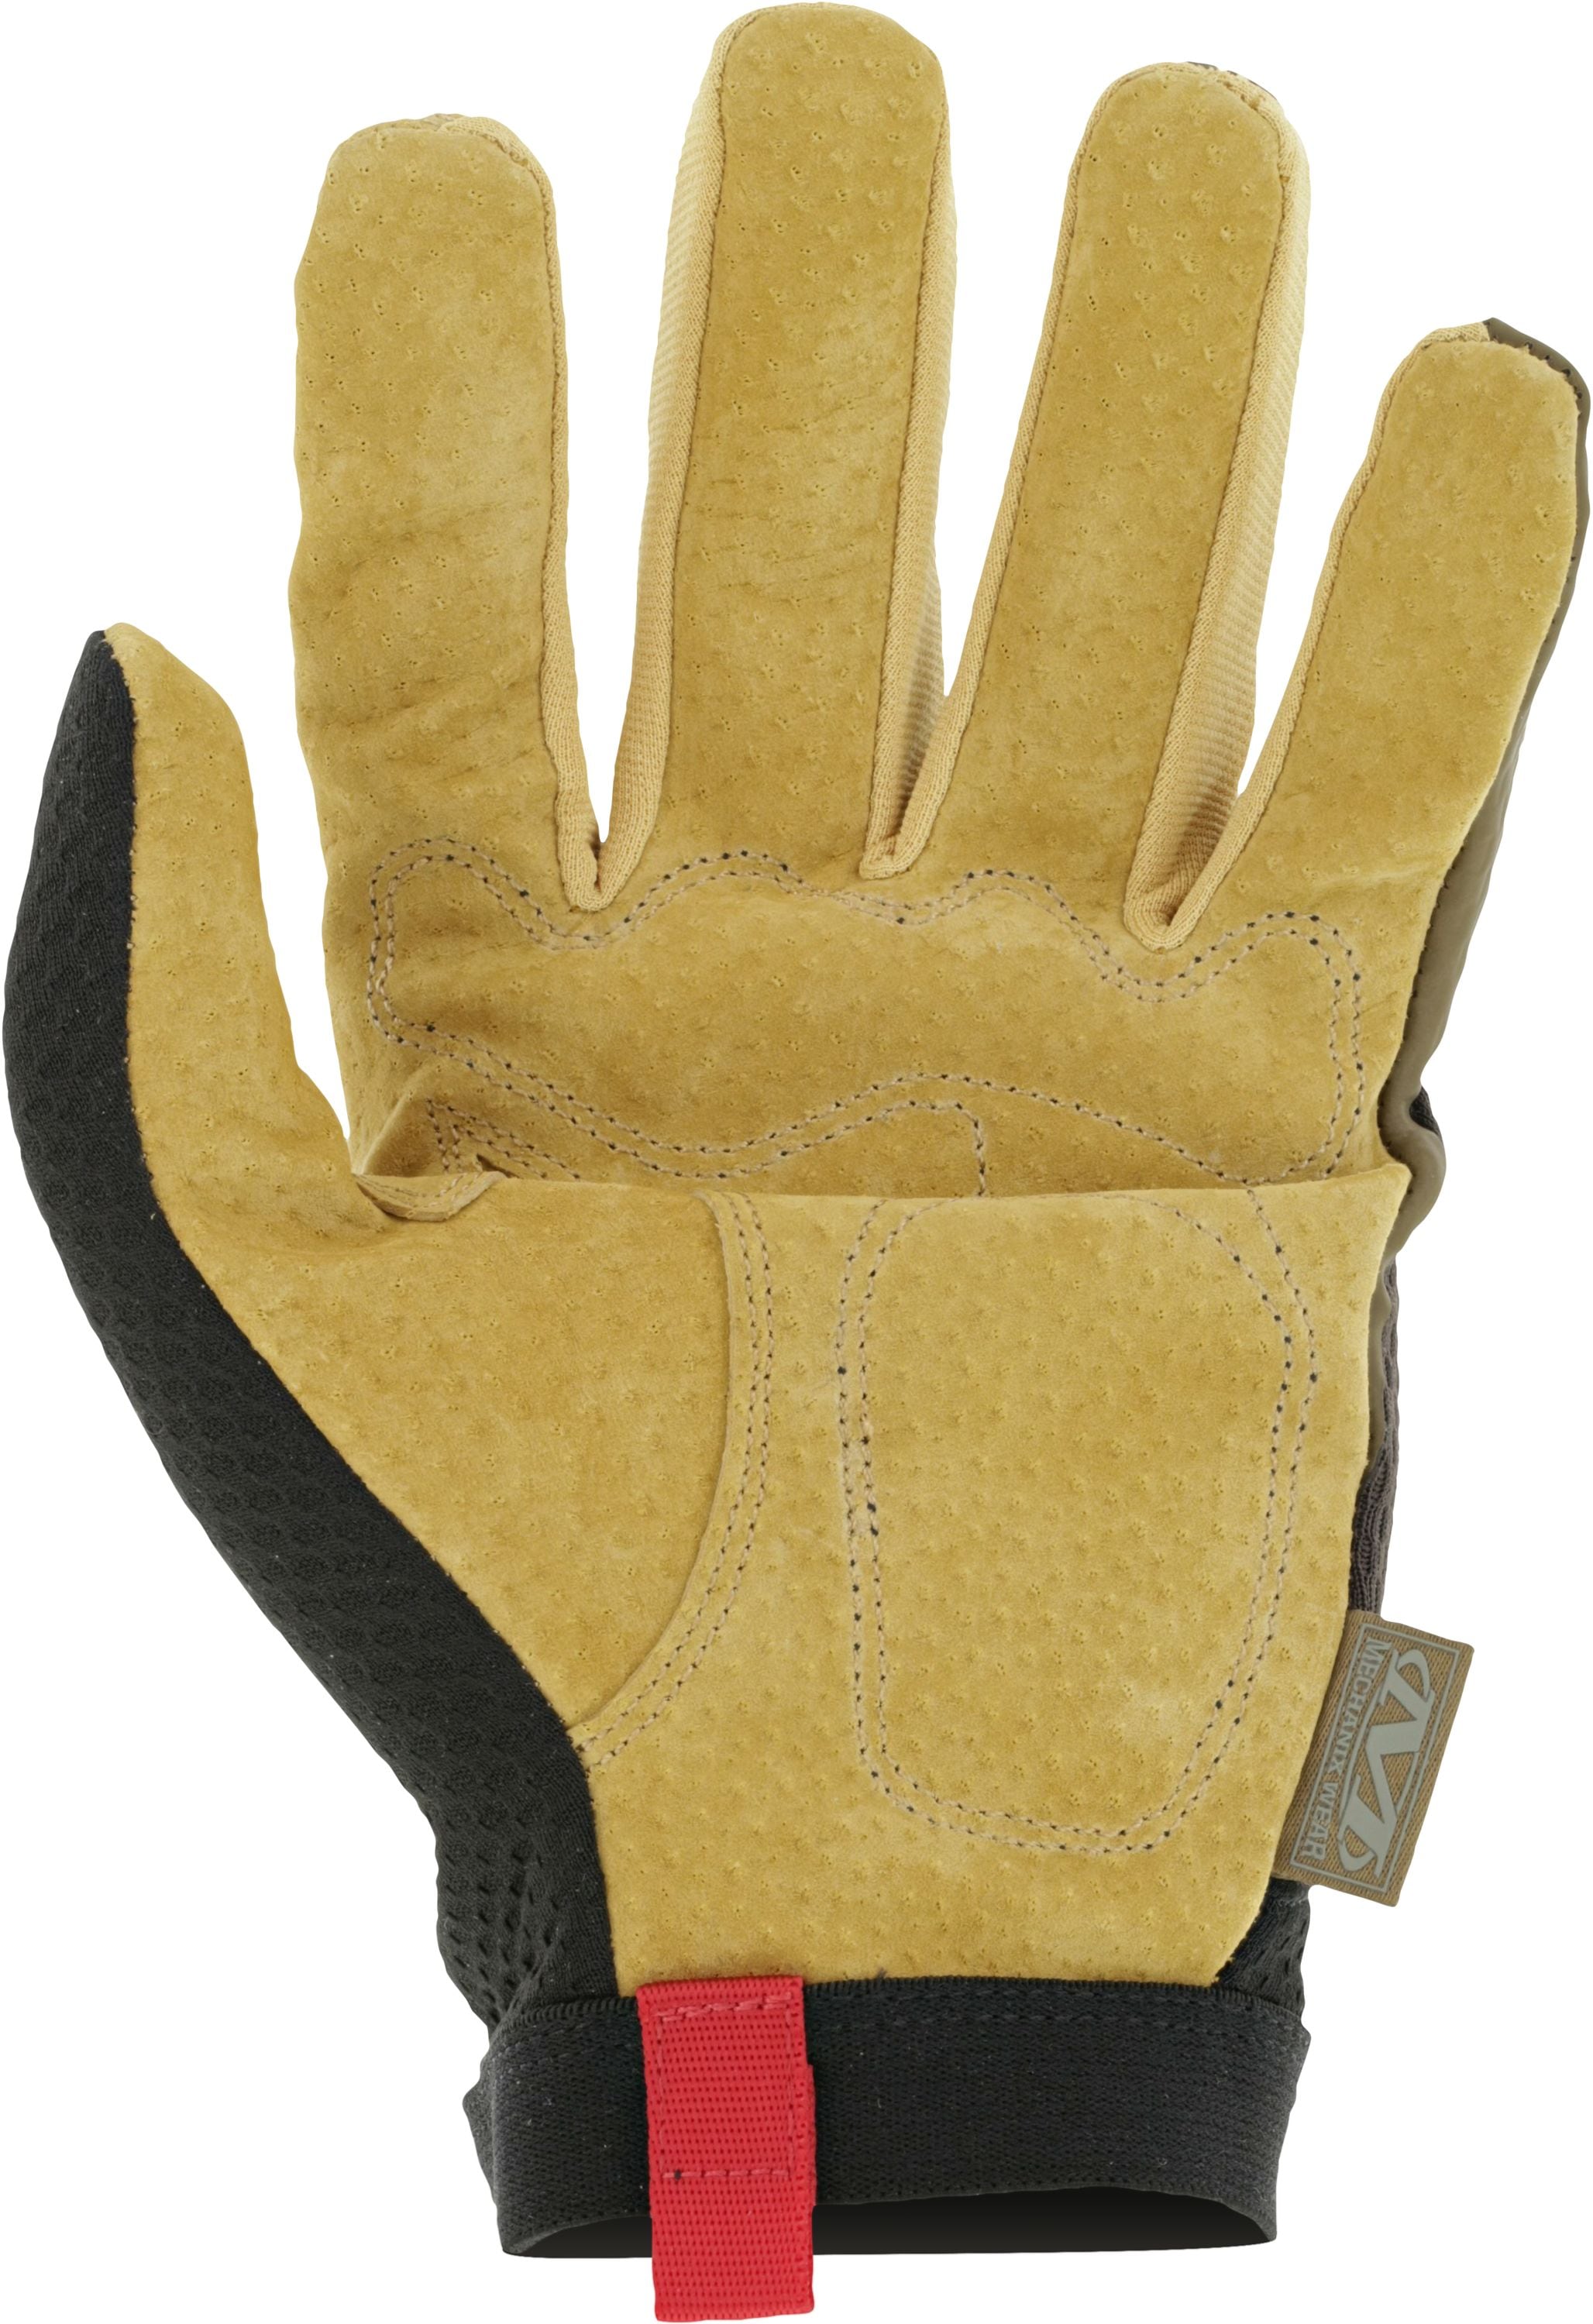 MECHANIX WEAR Large Brown Leather Gloves, (1-Pair) in the Work